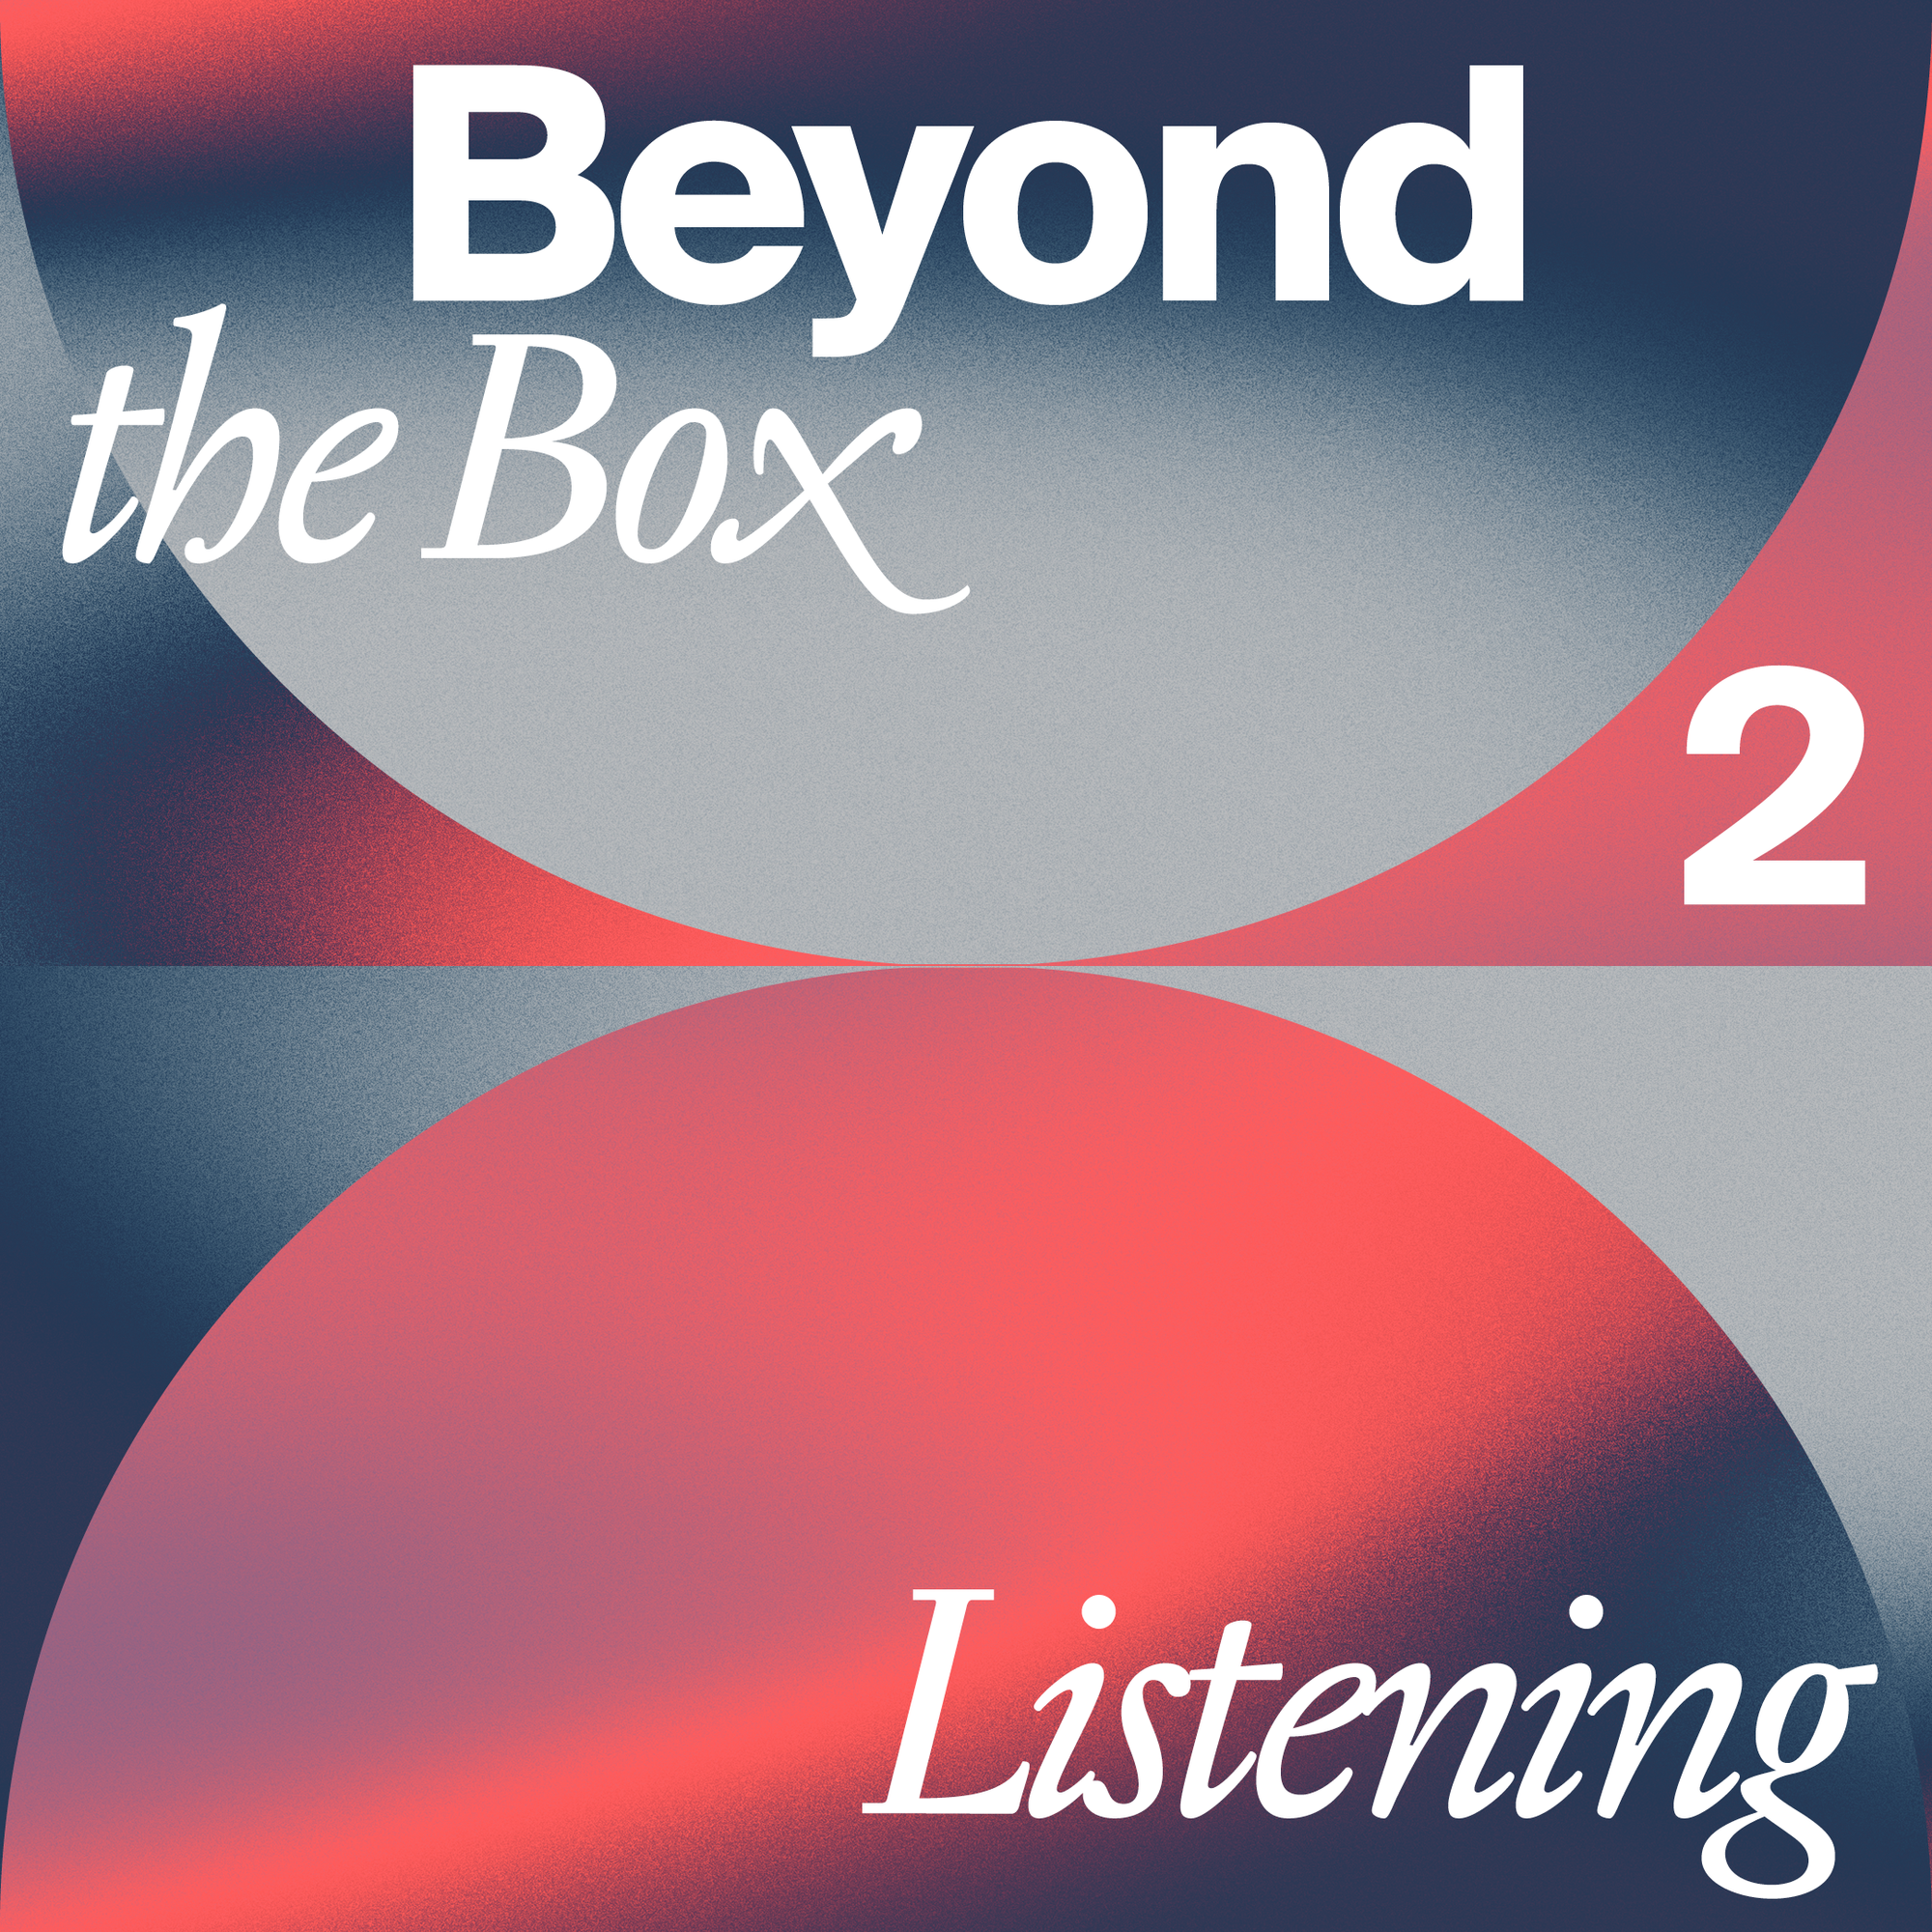 For Freedoms: Beyond The Box 2 (LISTENING for Individual Stories) at Pioneer Works